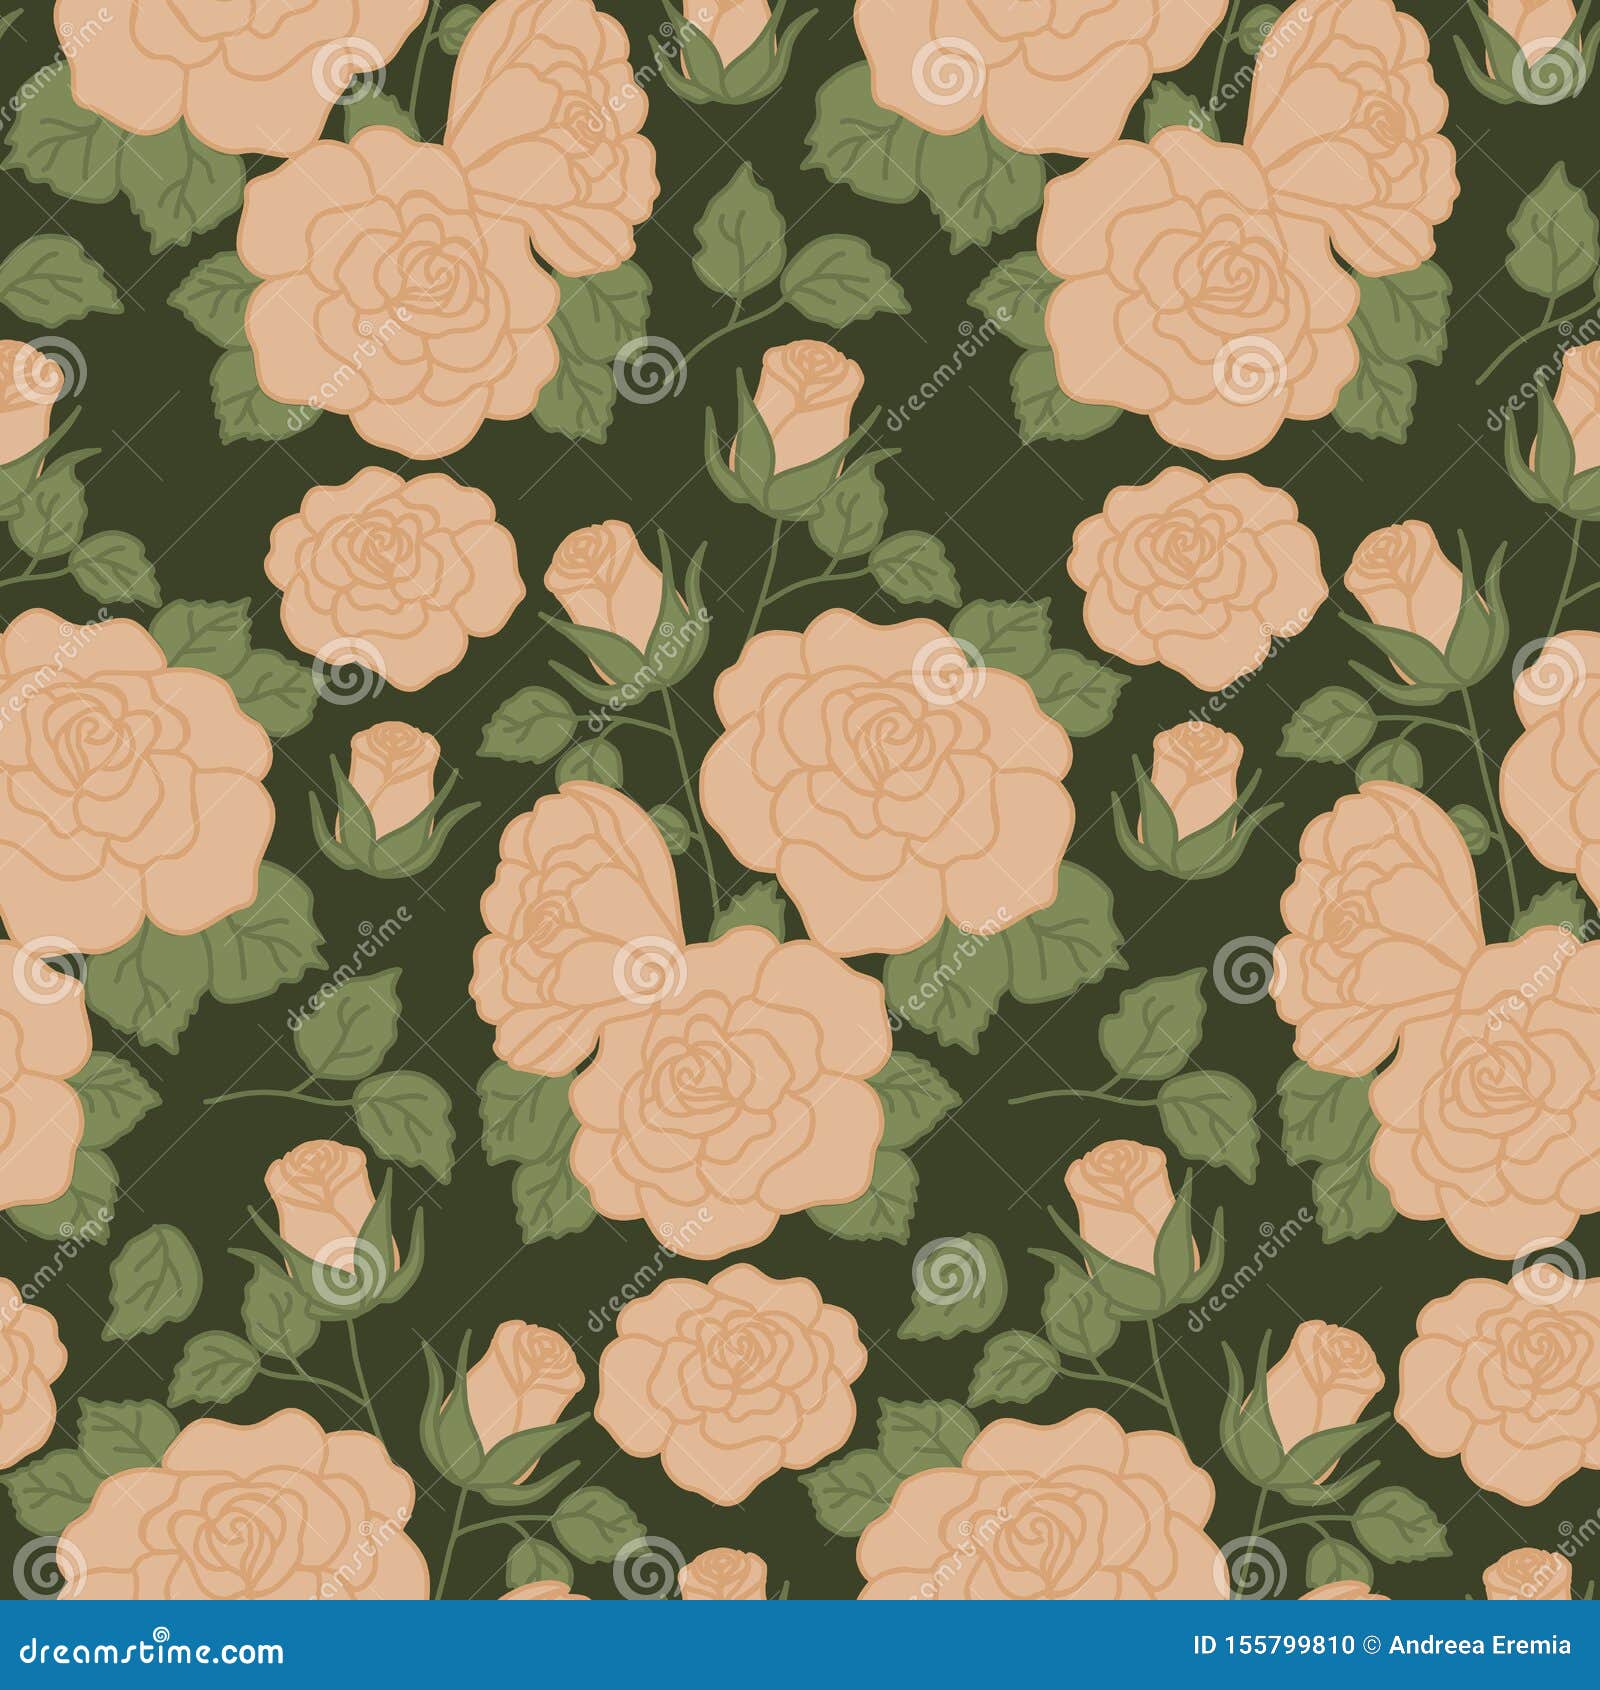 Bold Vintage Roses in a Seamless Pattern Design Stock Vector ...